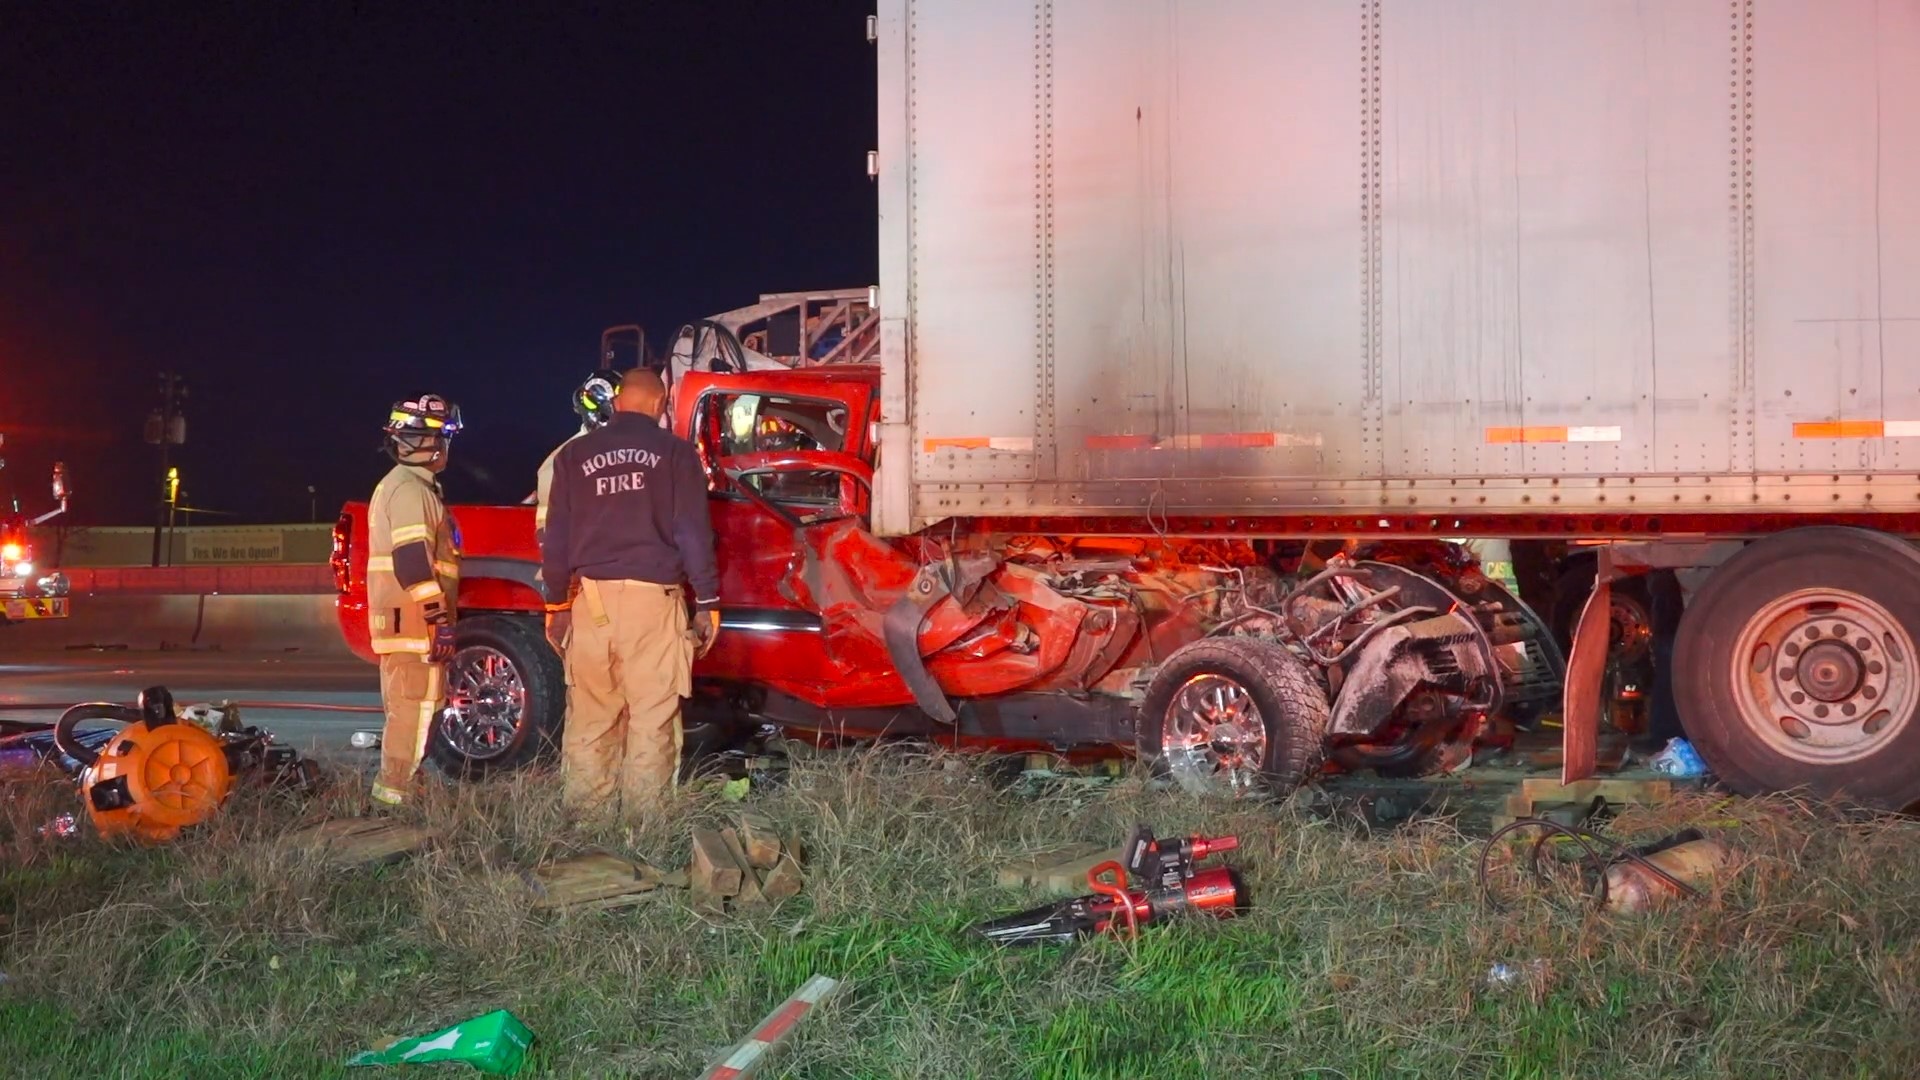 The driver of the pickup truck was trapped inside after slamming into a parked big rig, officials said.